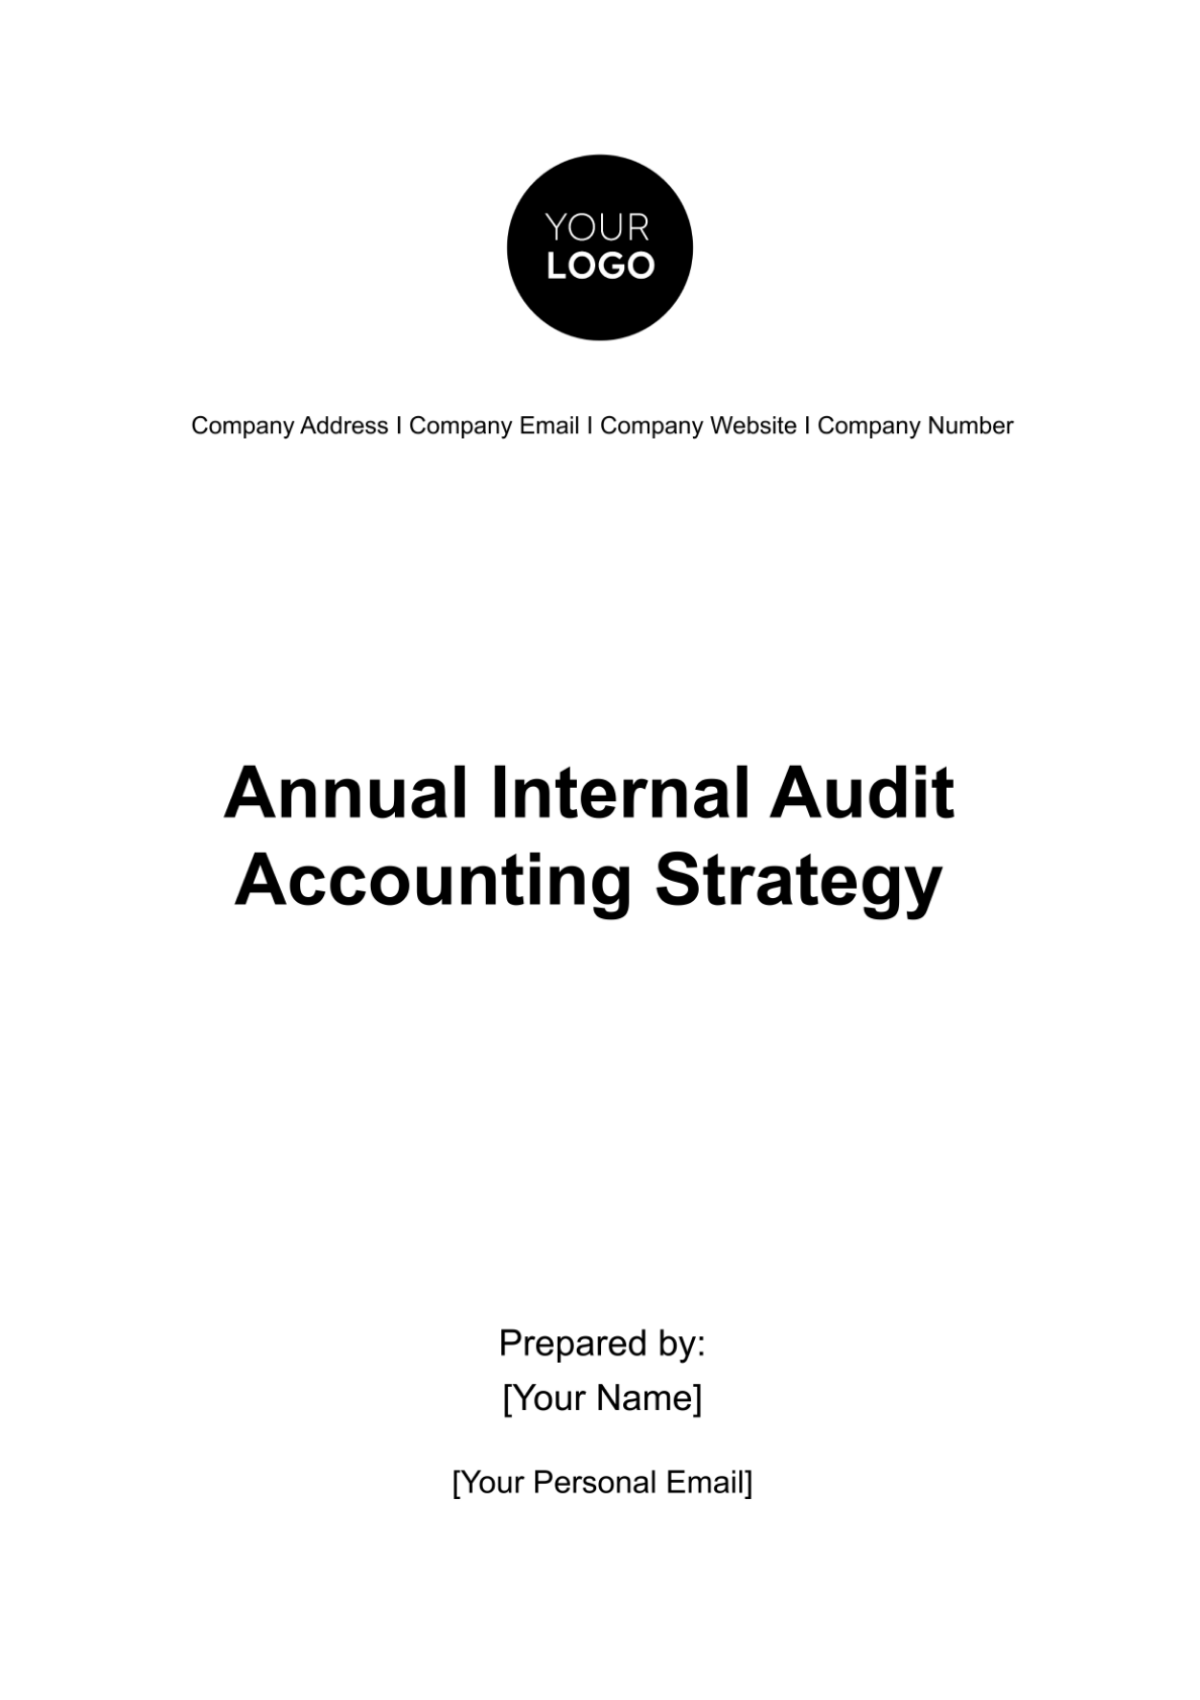 Annual Internal Audit Accounting Strategy Plan Template